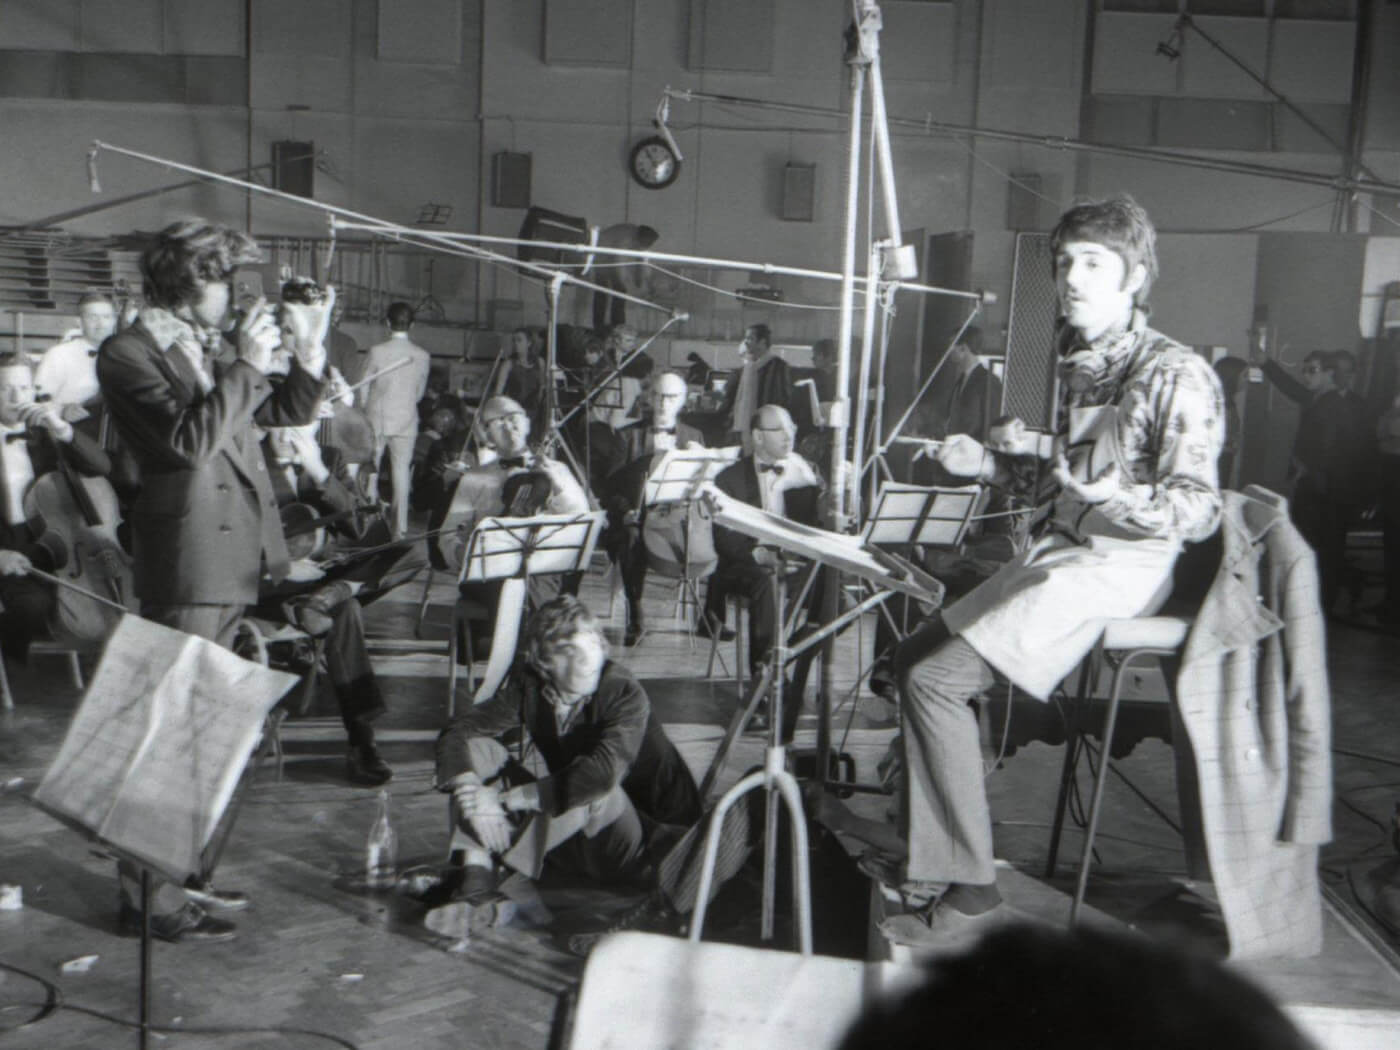 Paul McCartney during the recording of 'A Day In The Life' at Abbey Road